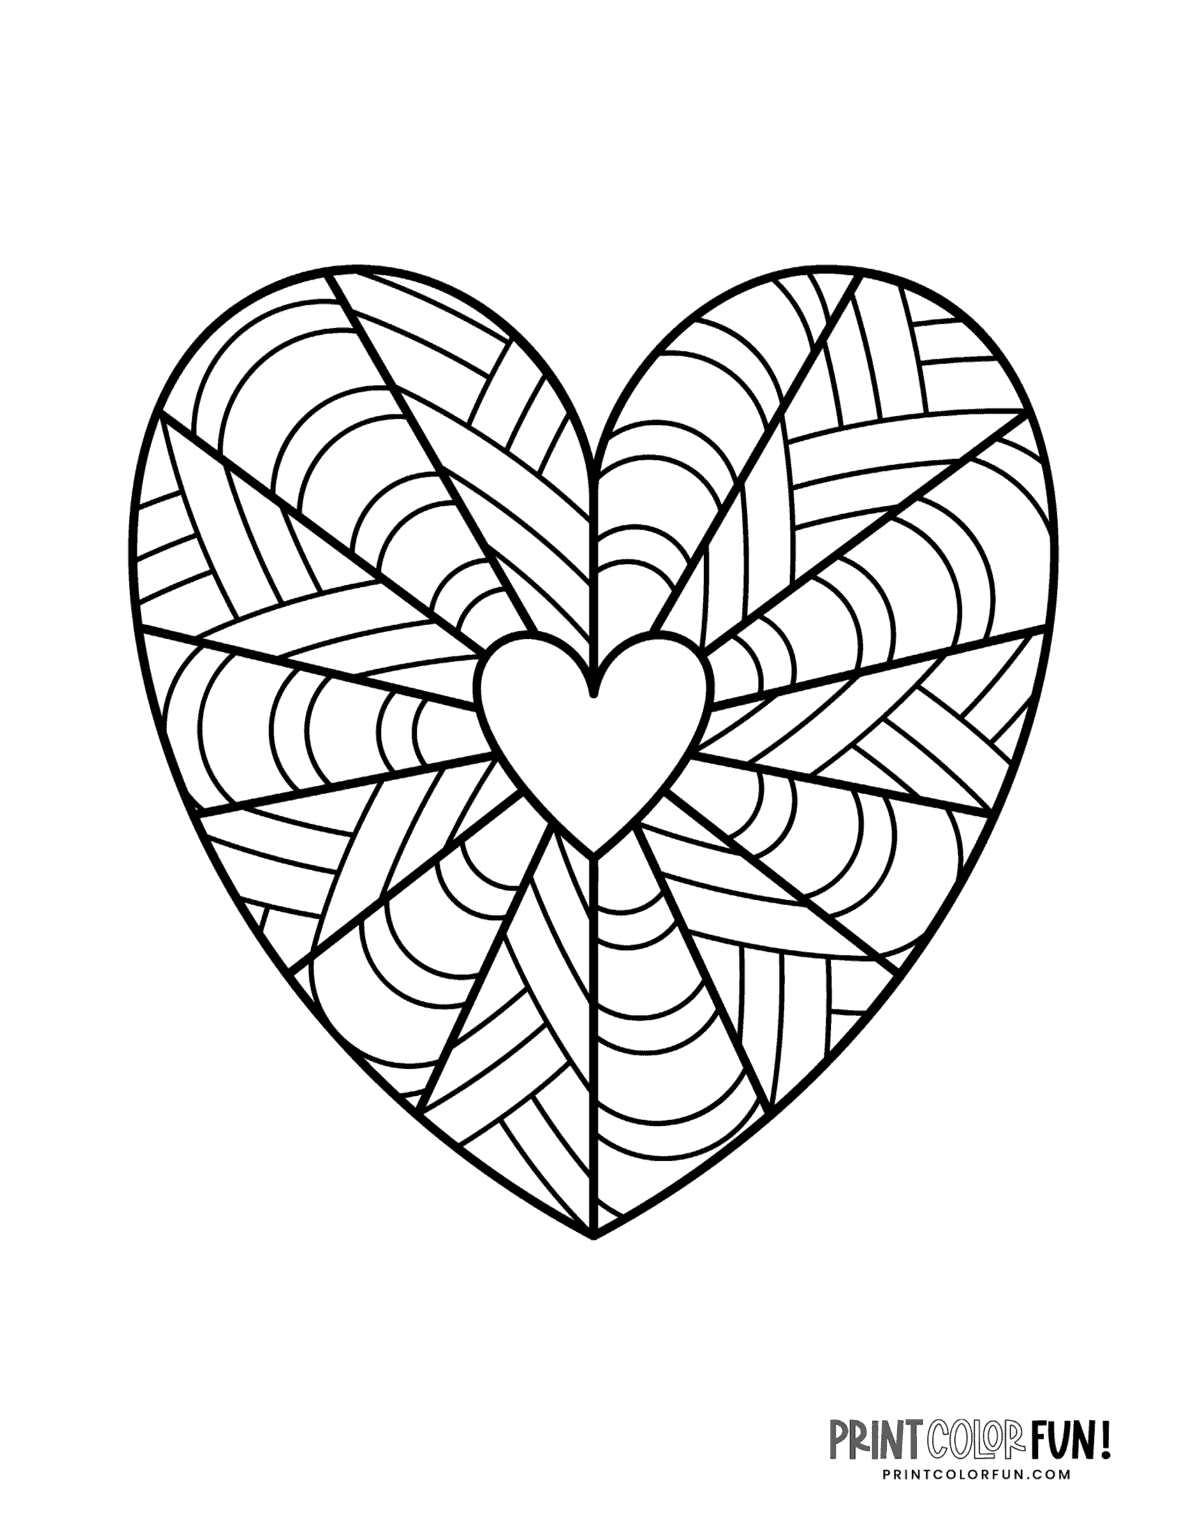 100 Heart Coloring Pages A Huge Collection Of Free Valentine s Day